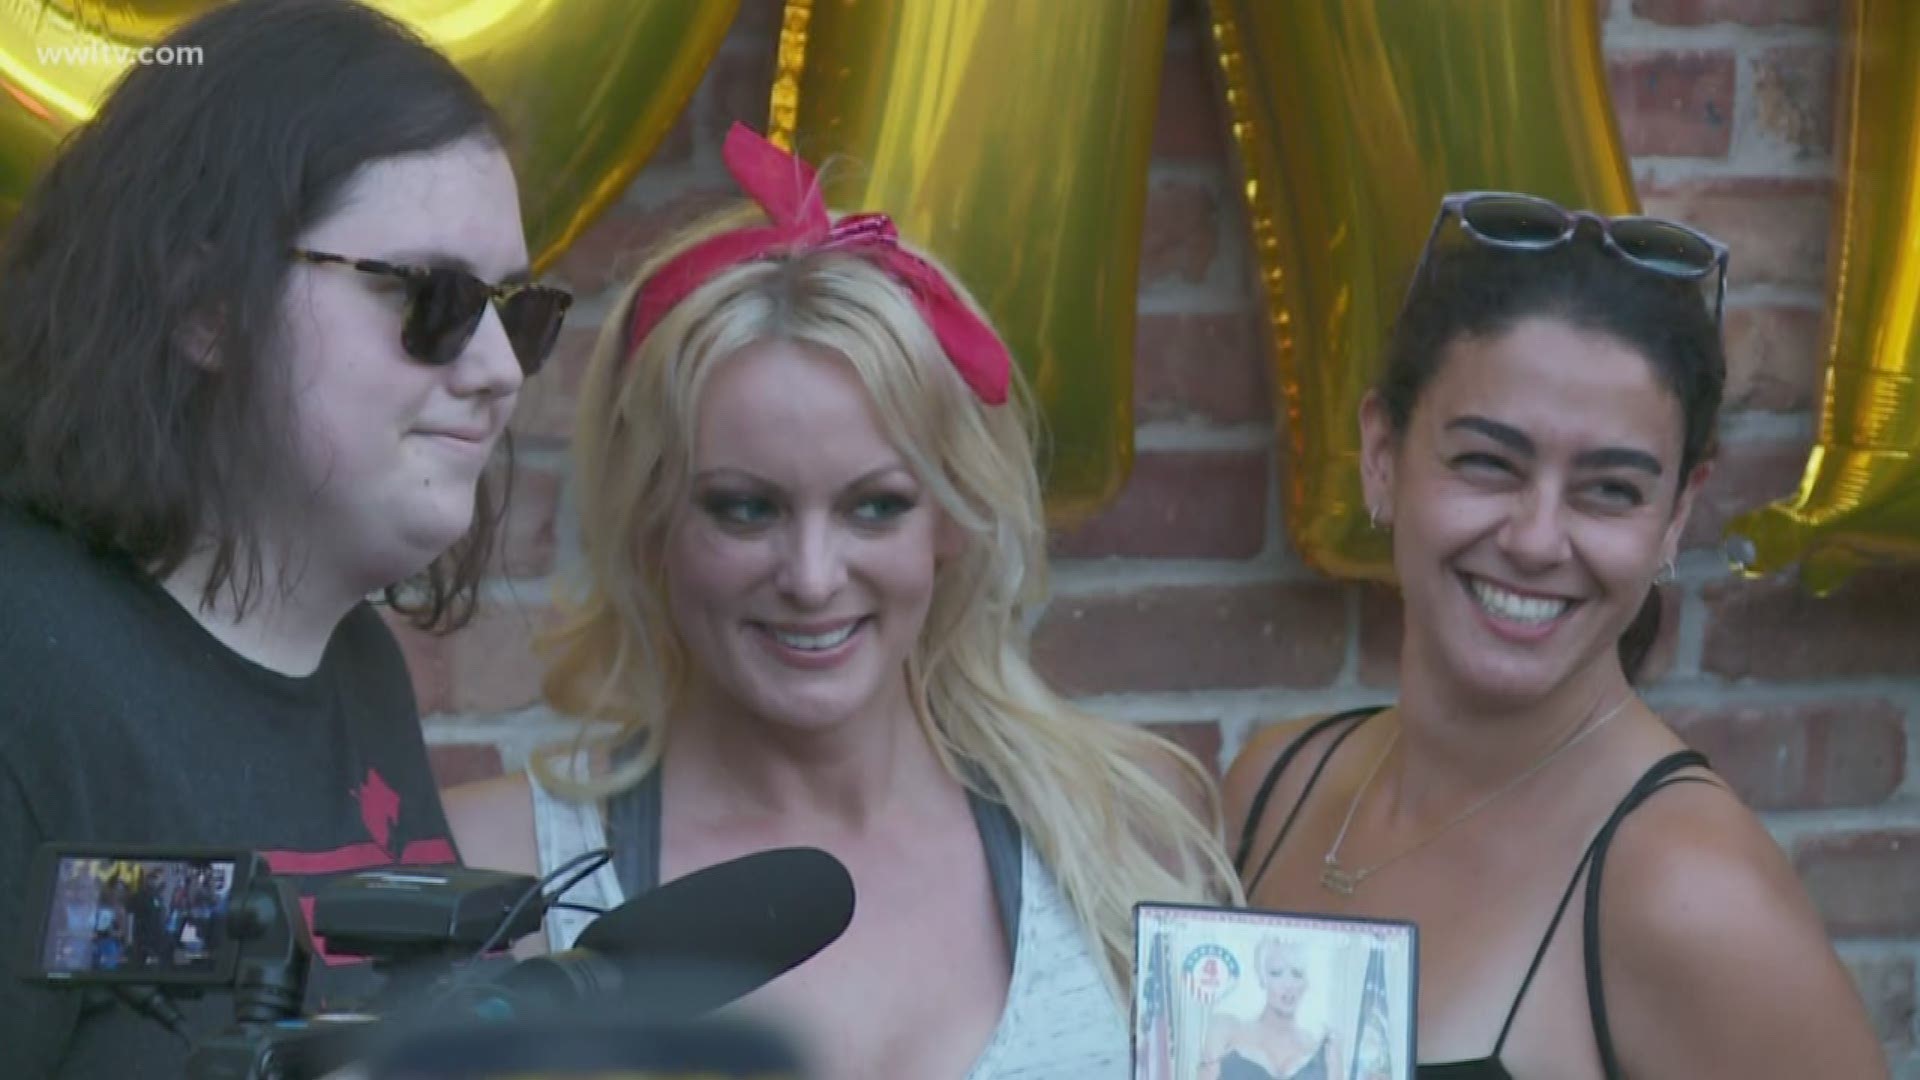 Adult film star Stormy Daniels was in the Big Easy Sunday evening to raise money for the New Orleans Abortion Fund.